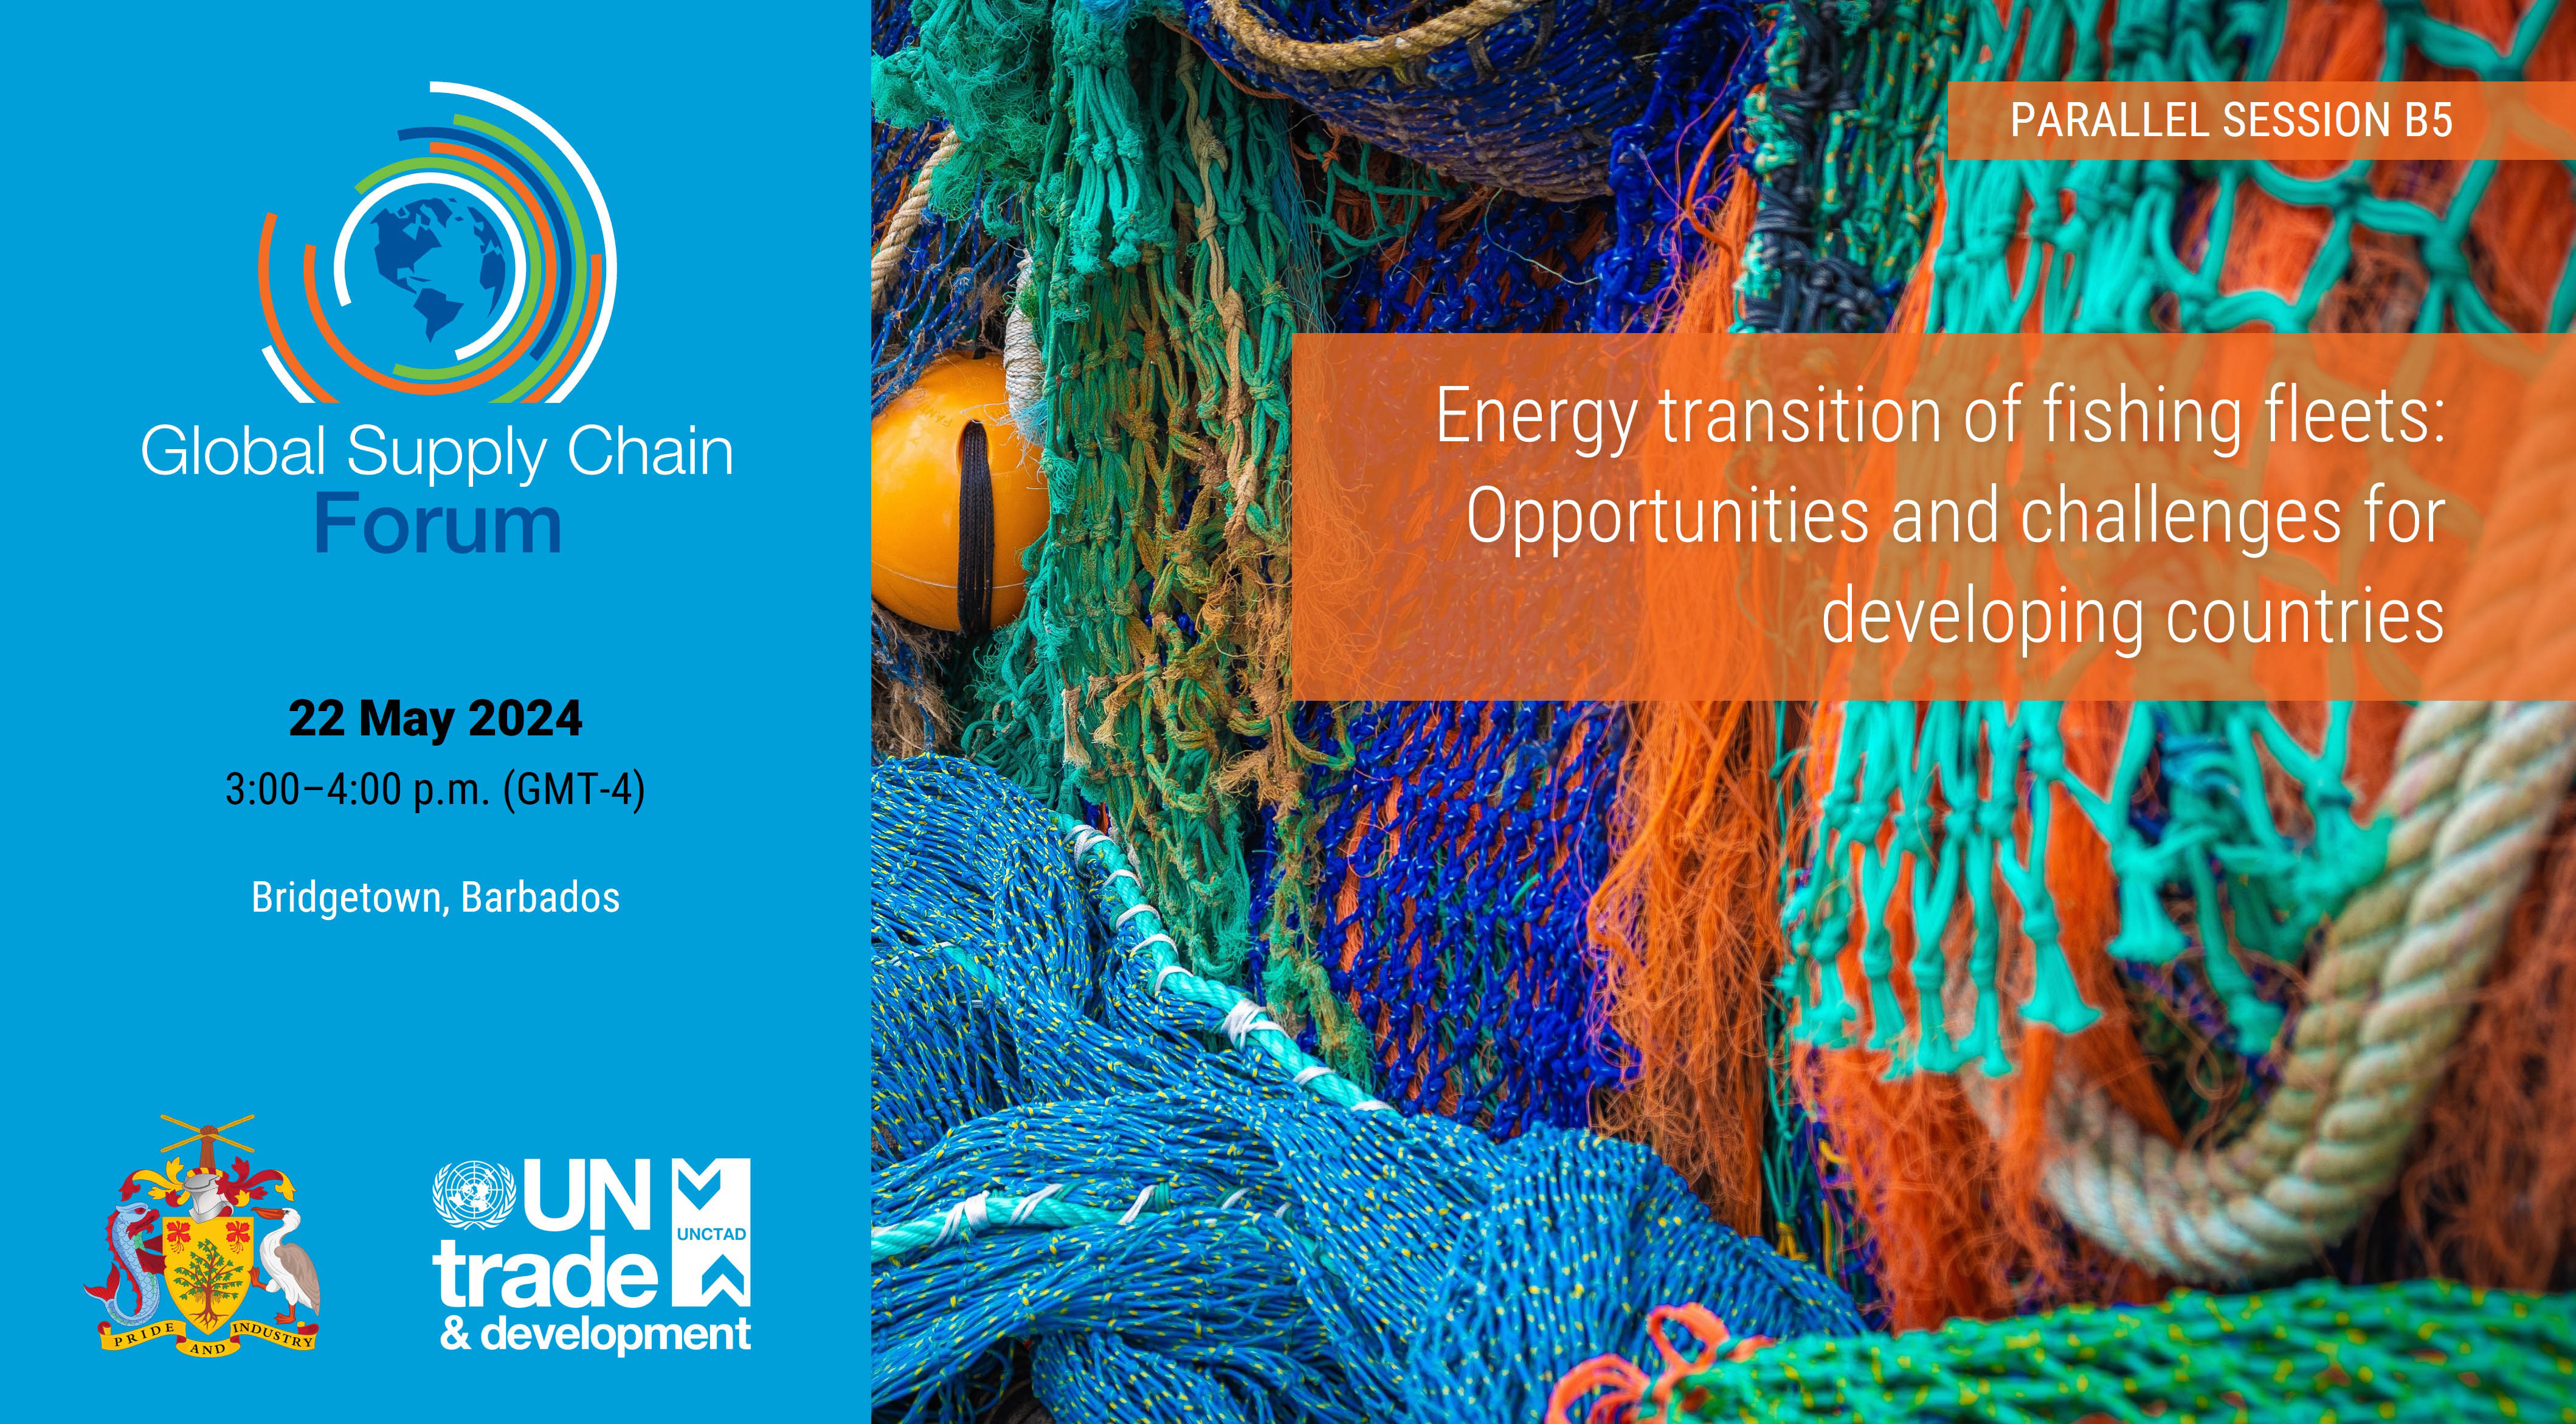 Energy transition of fishing fleets: Opportunities and challenges for developing countries